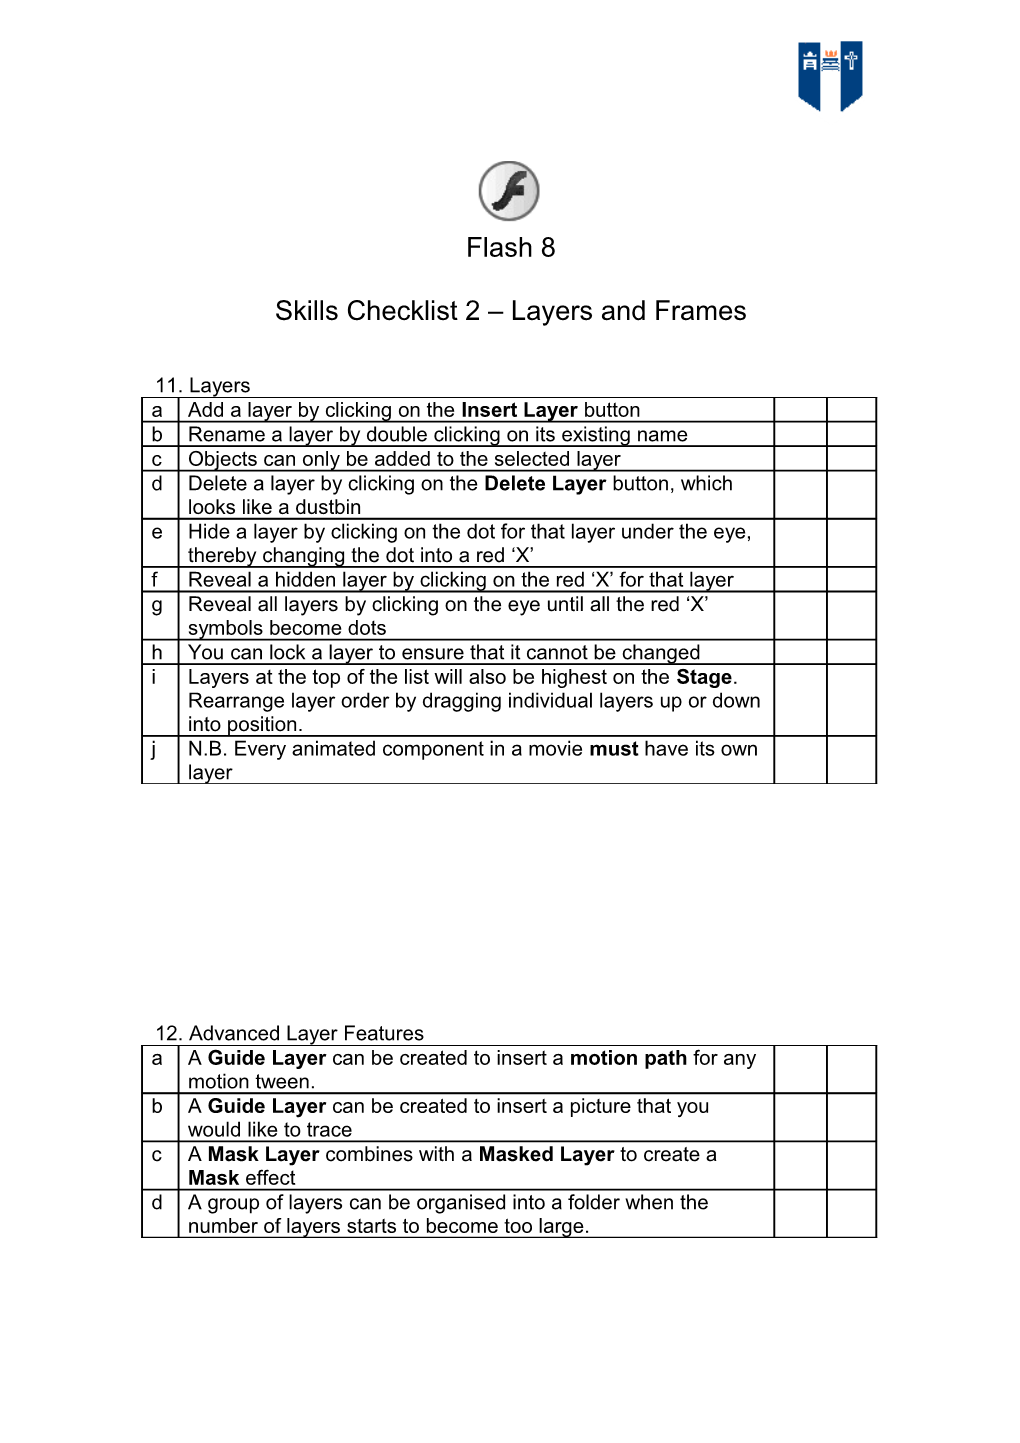 Skills Checklist 2 Layers and Frames